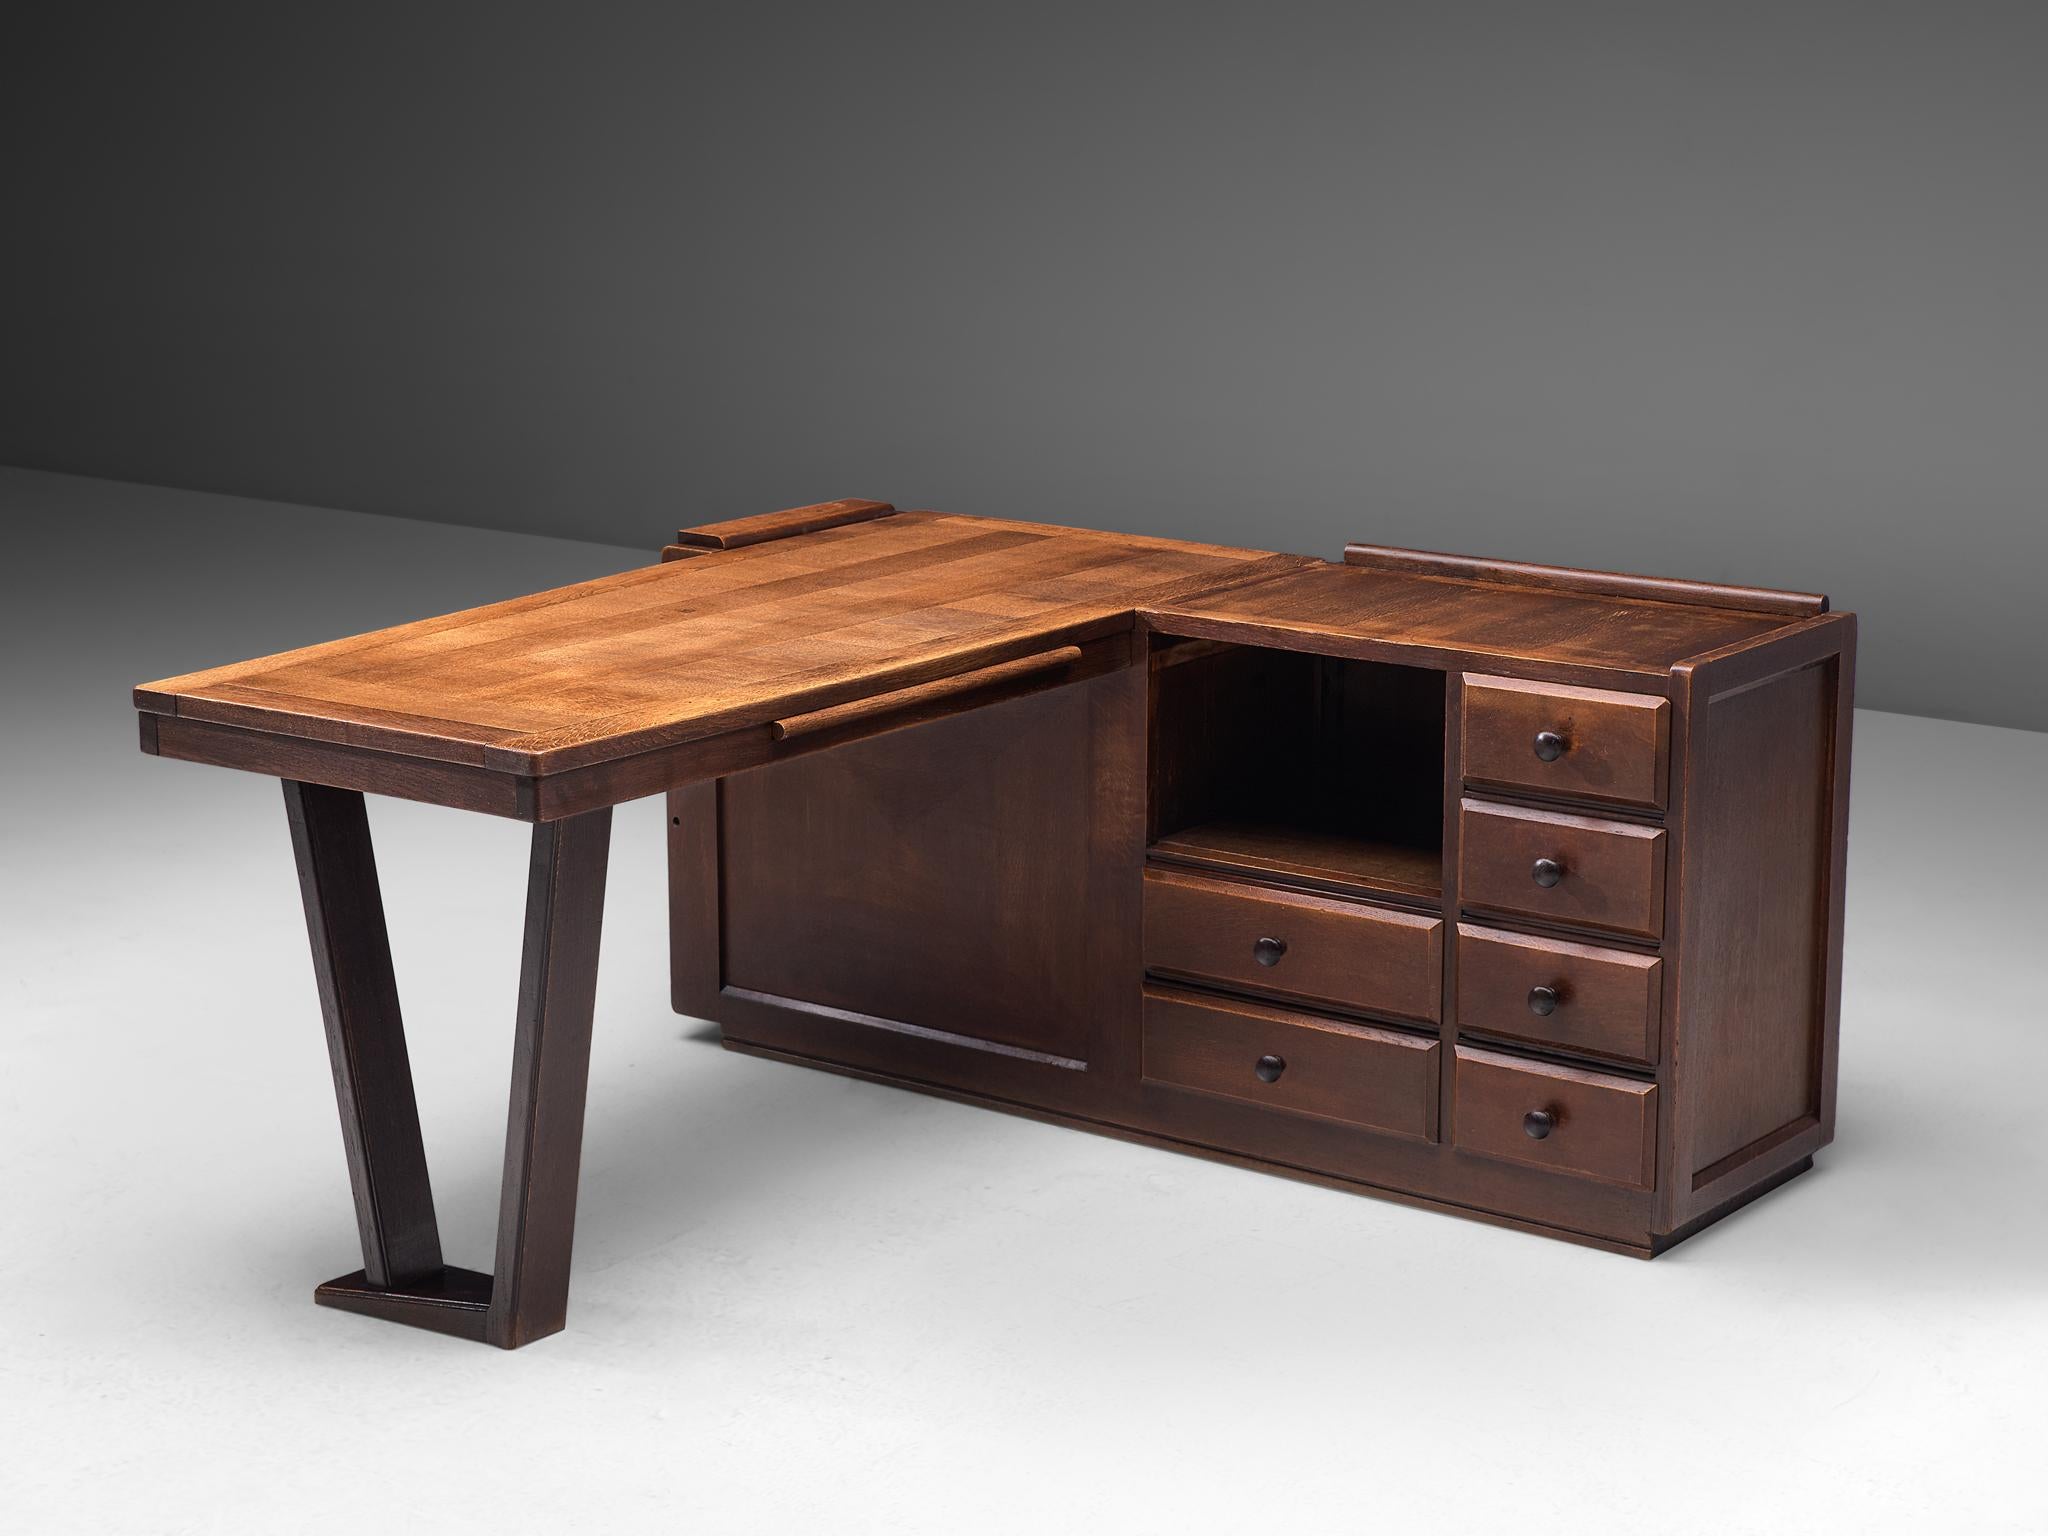 Guillerme et Chambron, desk, dark stained oak, France, 1950s.

Corner desk by French designer duo Guillerme and Chambron. This executive desk shows the fine craftsmanship and line work that characterizes the work of this designer duo. The stained